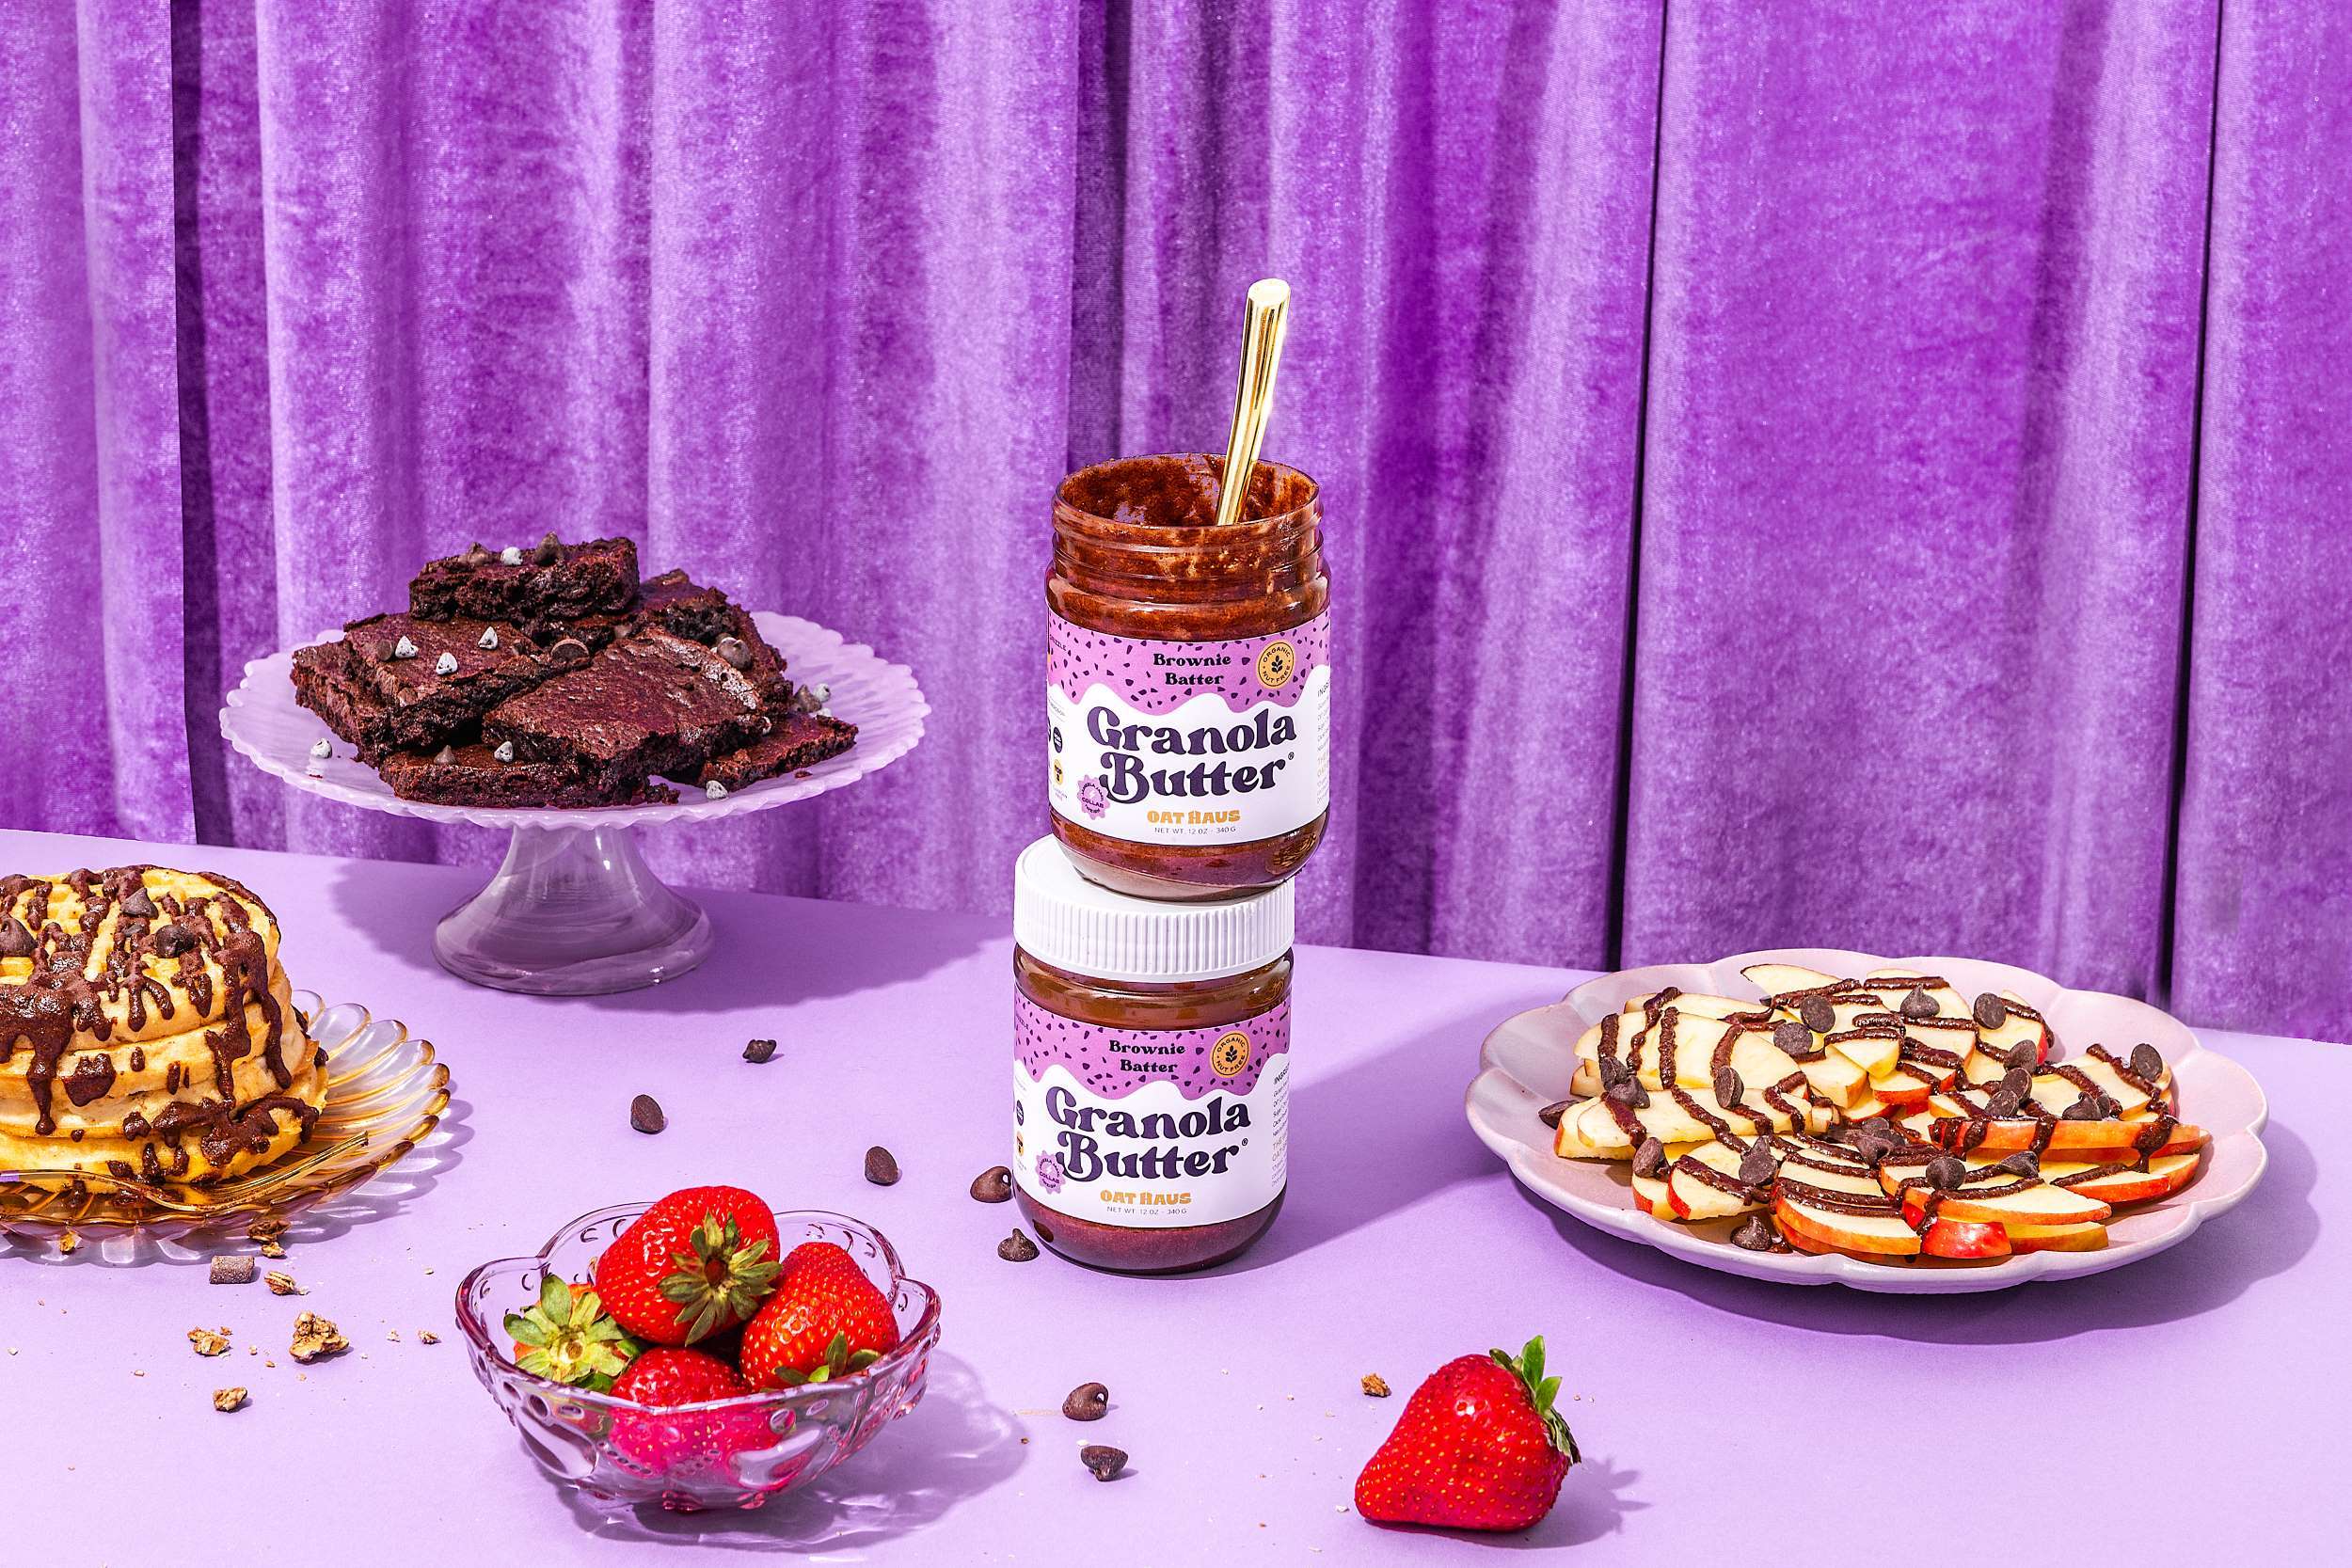 Oat Haus products styled with other foods against a purple curtain